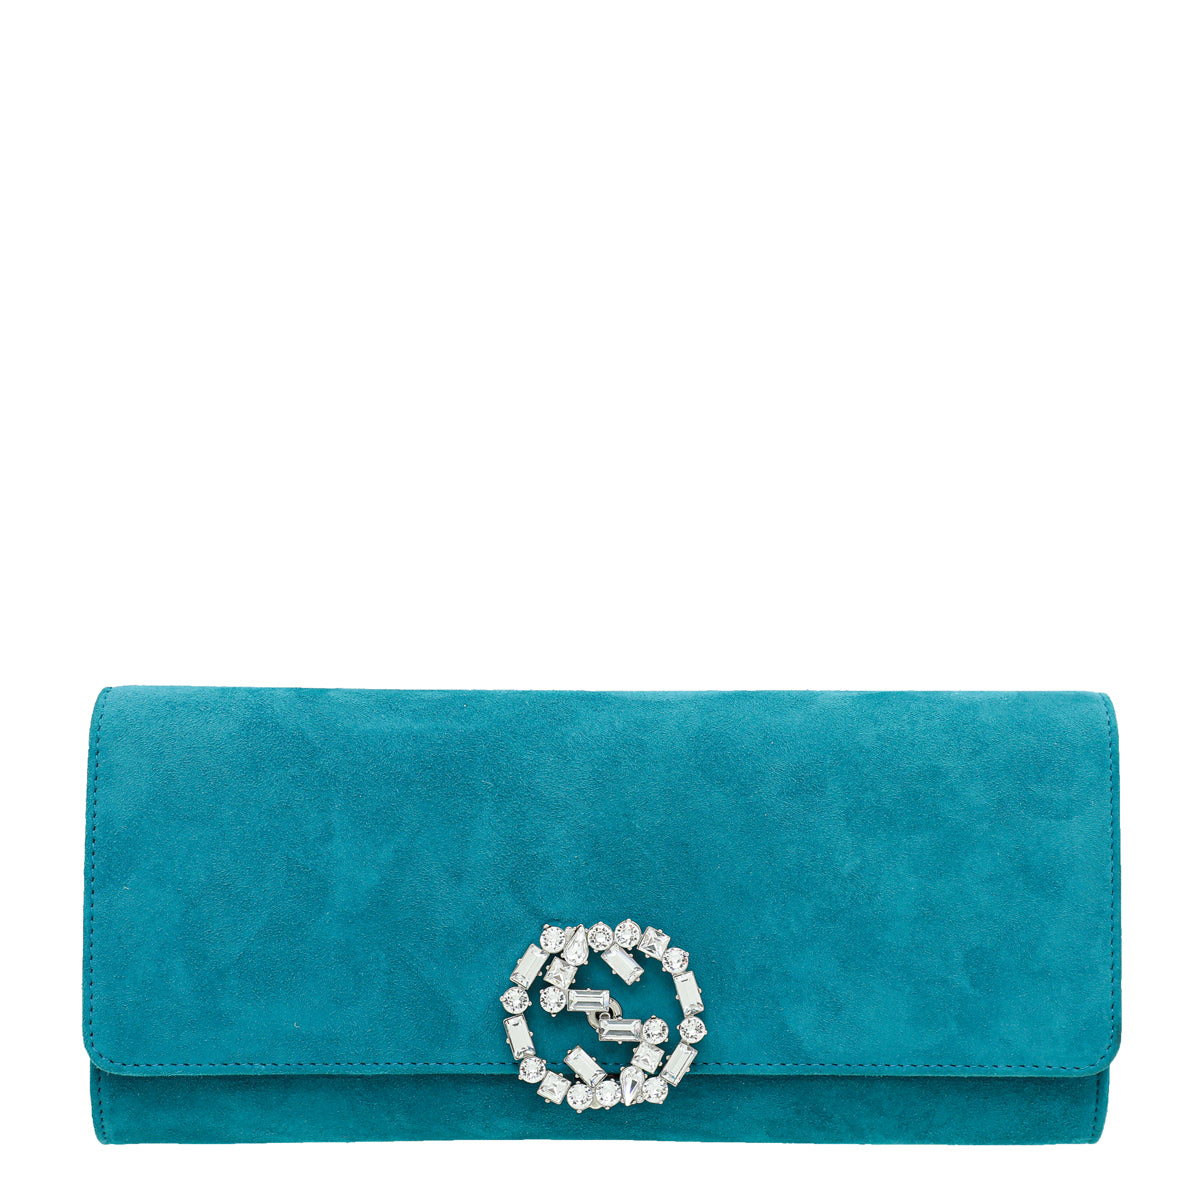 Gucci Turquoise Suede Broadway Jeweled Clutch